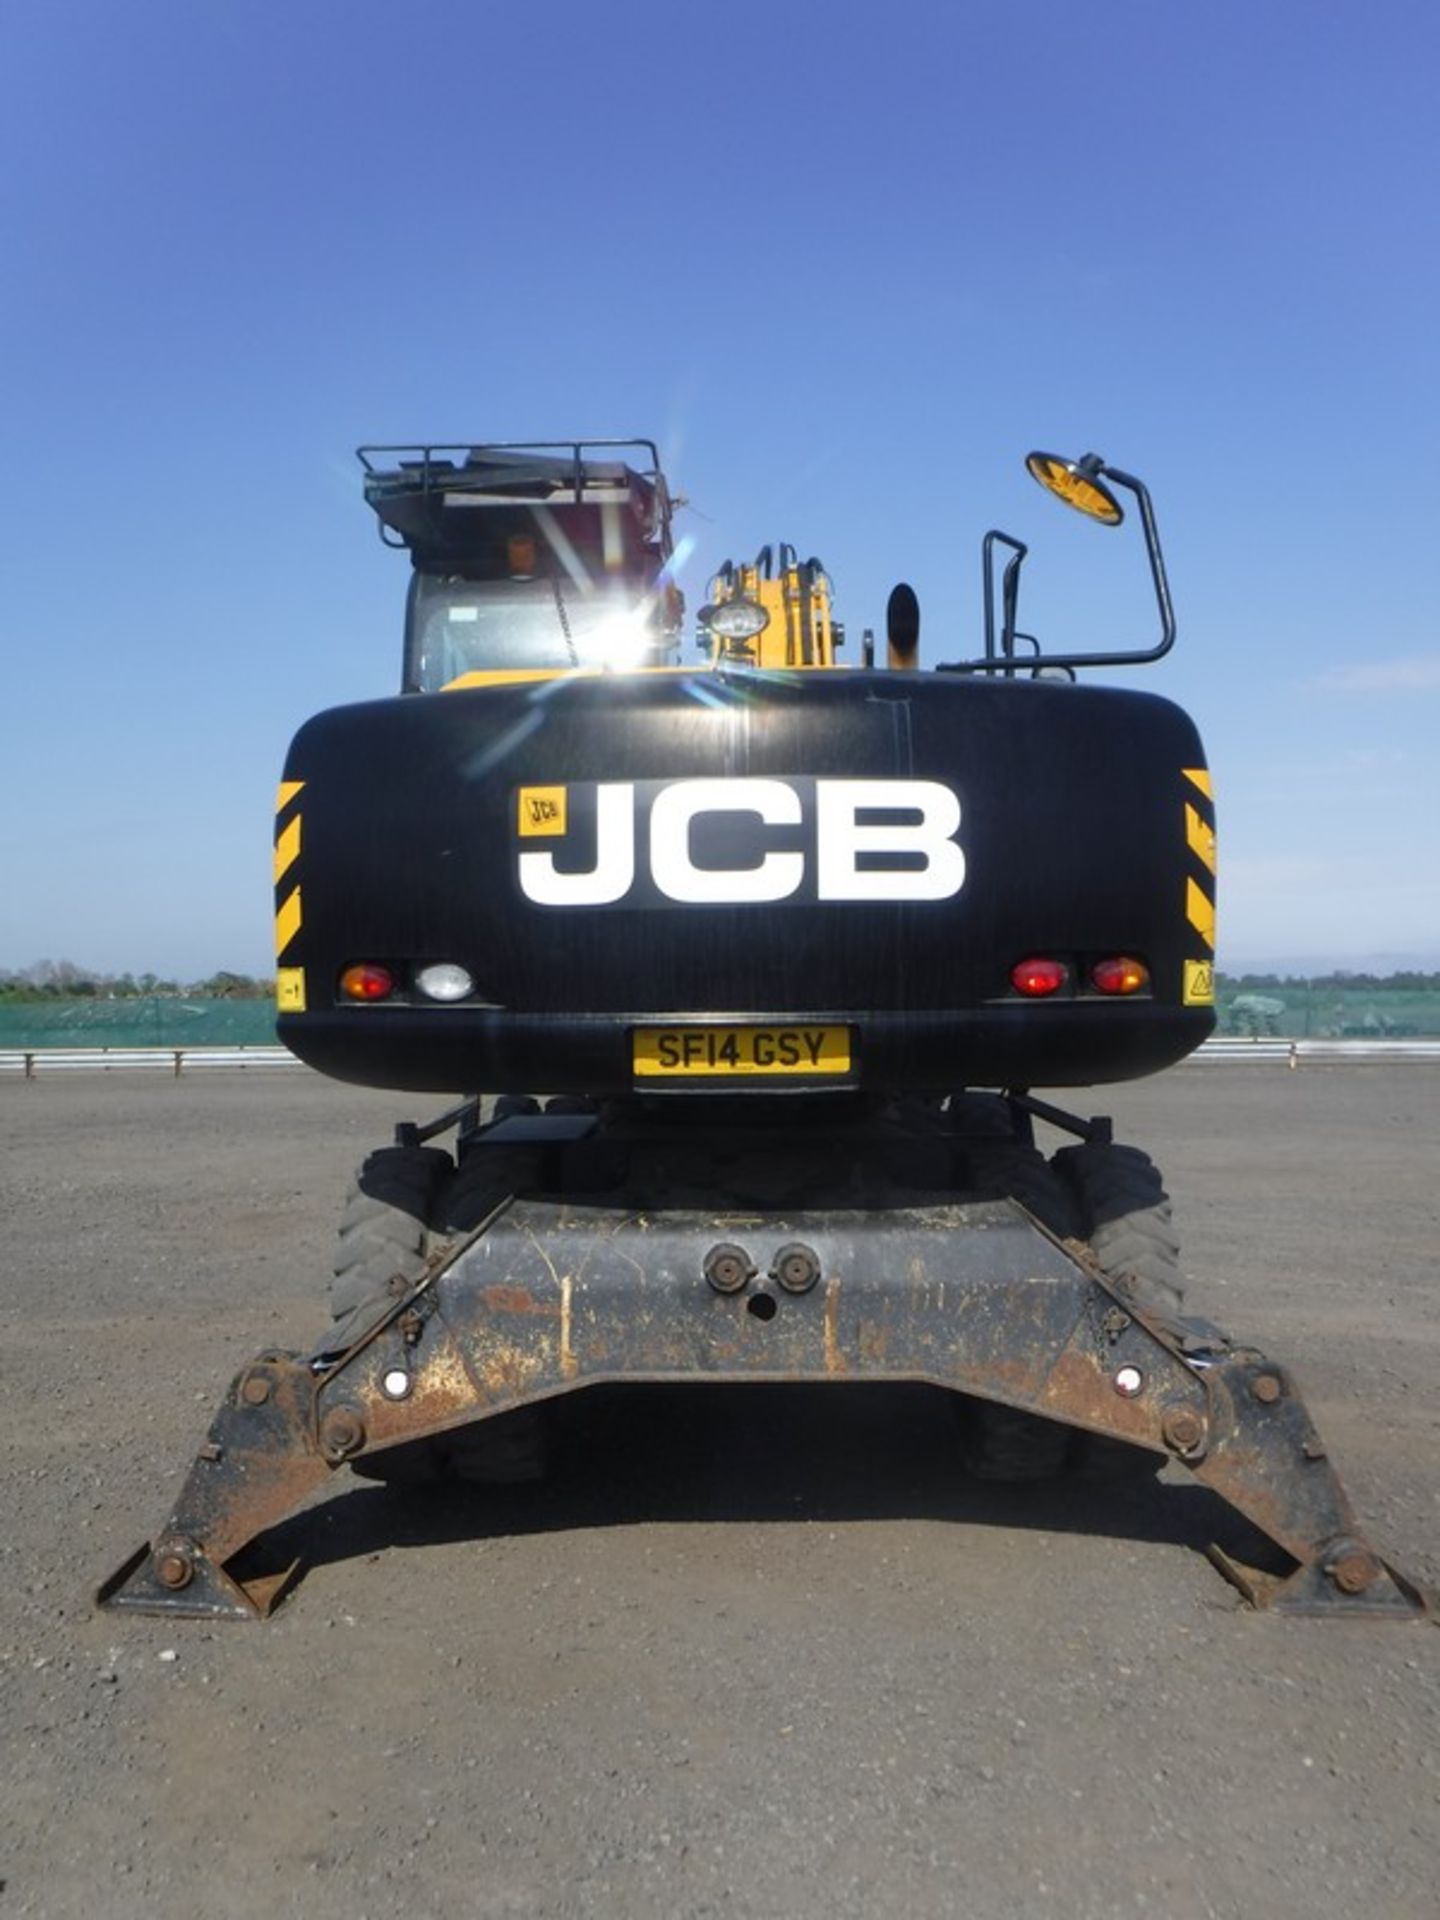 2014 JCB 160W, reg - SF14GSY, s/n DH02299074, 4608hrs (not verified) - Image 19 of 25